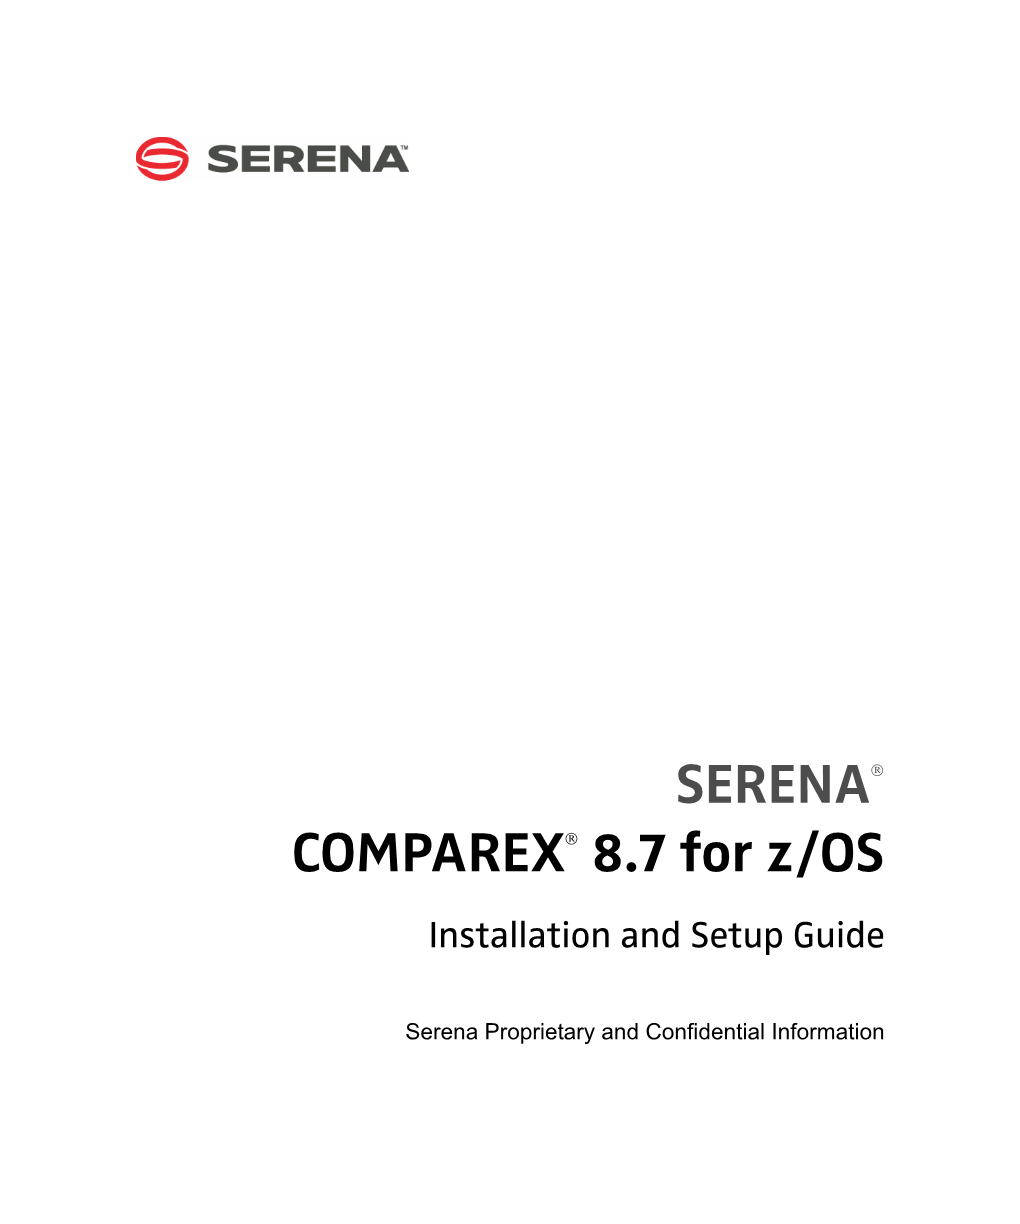 Serena® Comparex® 8.7 for Z/OS Table of Contents